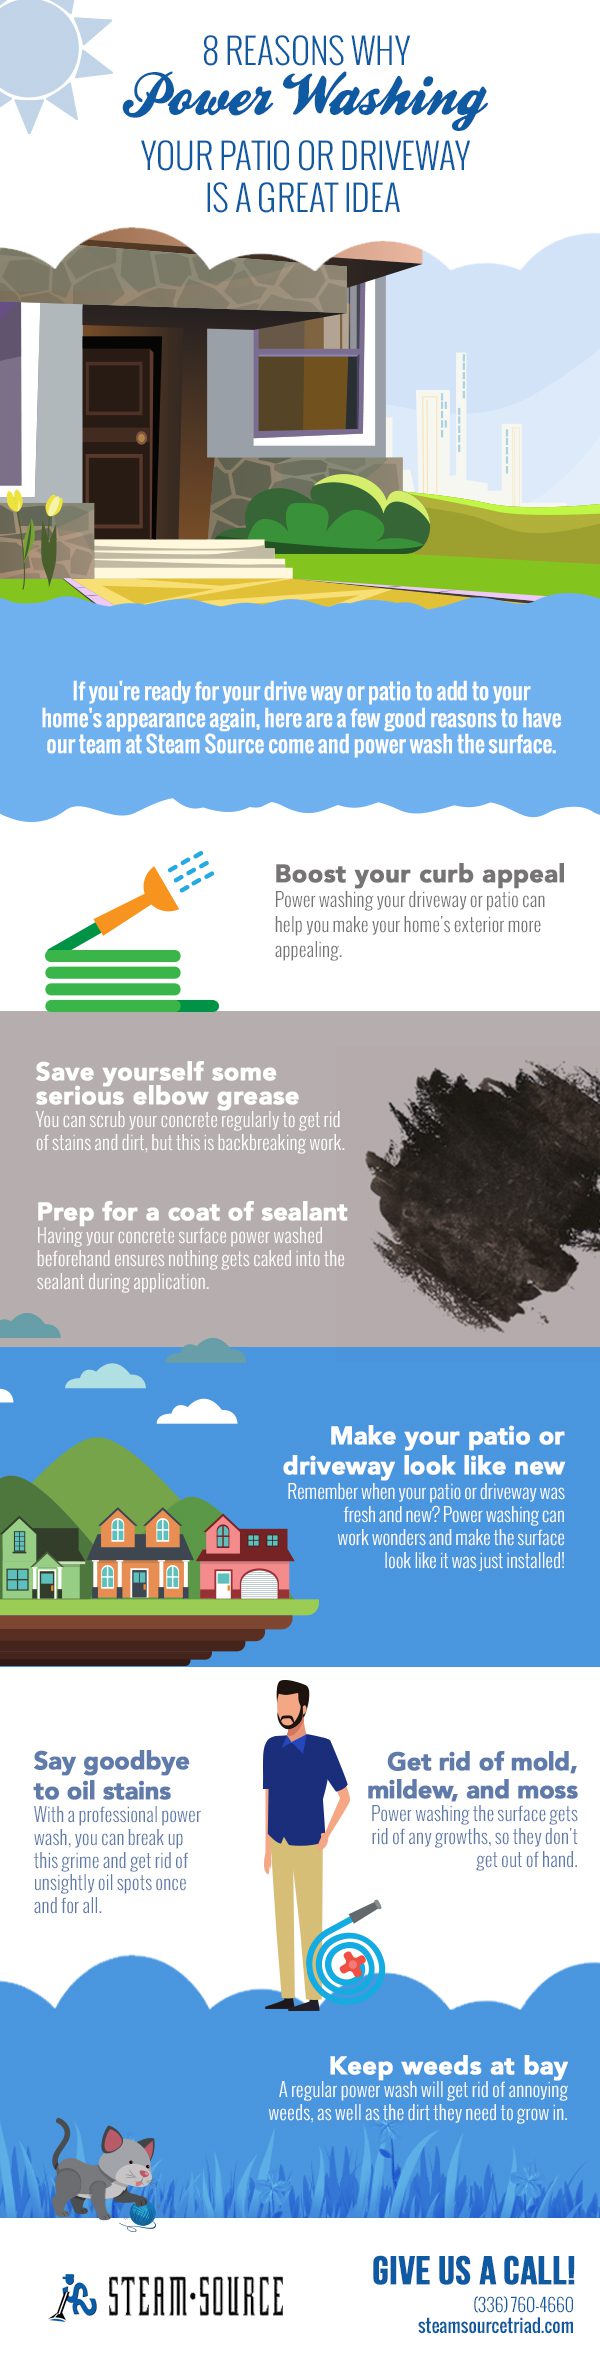 8 Reasons Why Power Washing Your Patio or Driveway is a Great Idea [infographic]